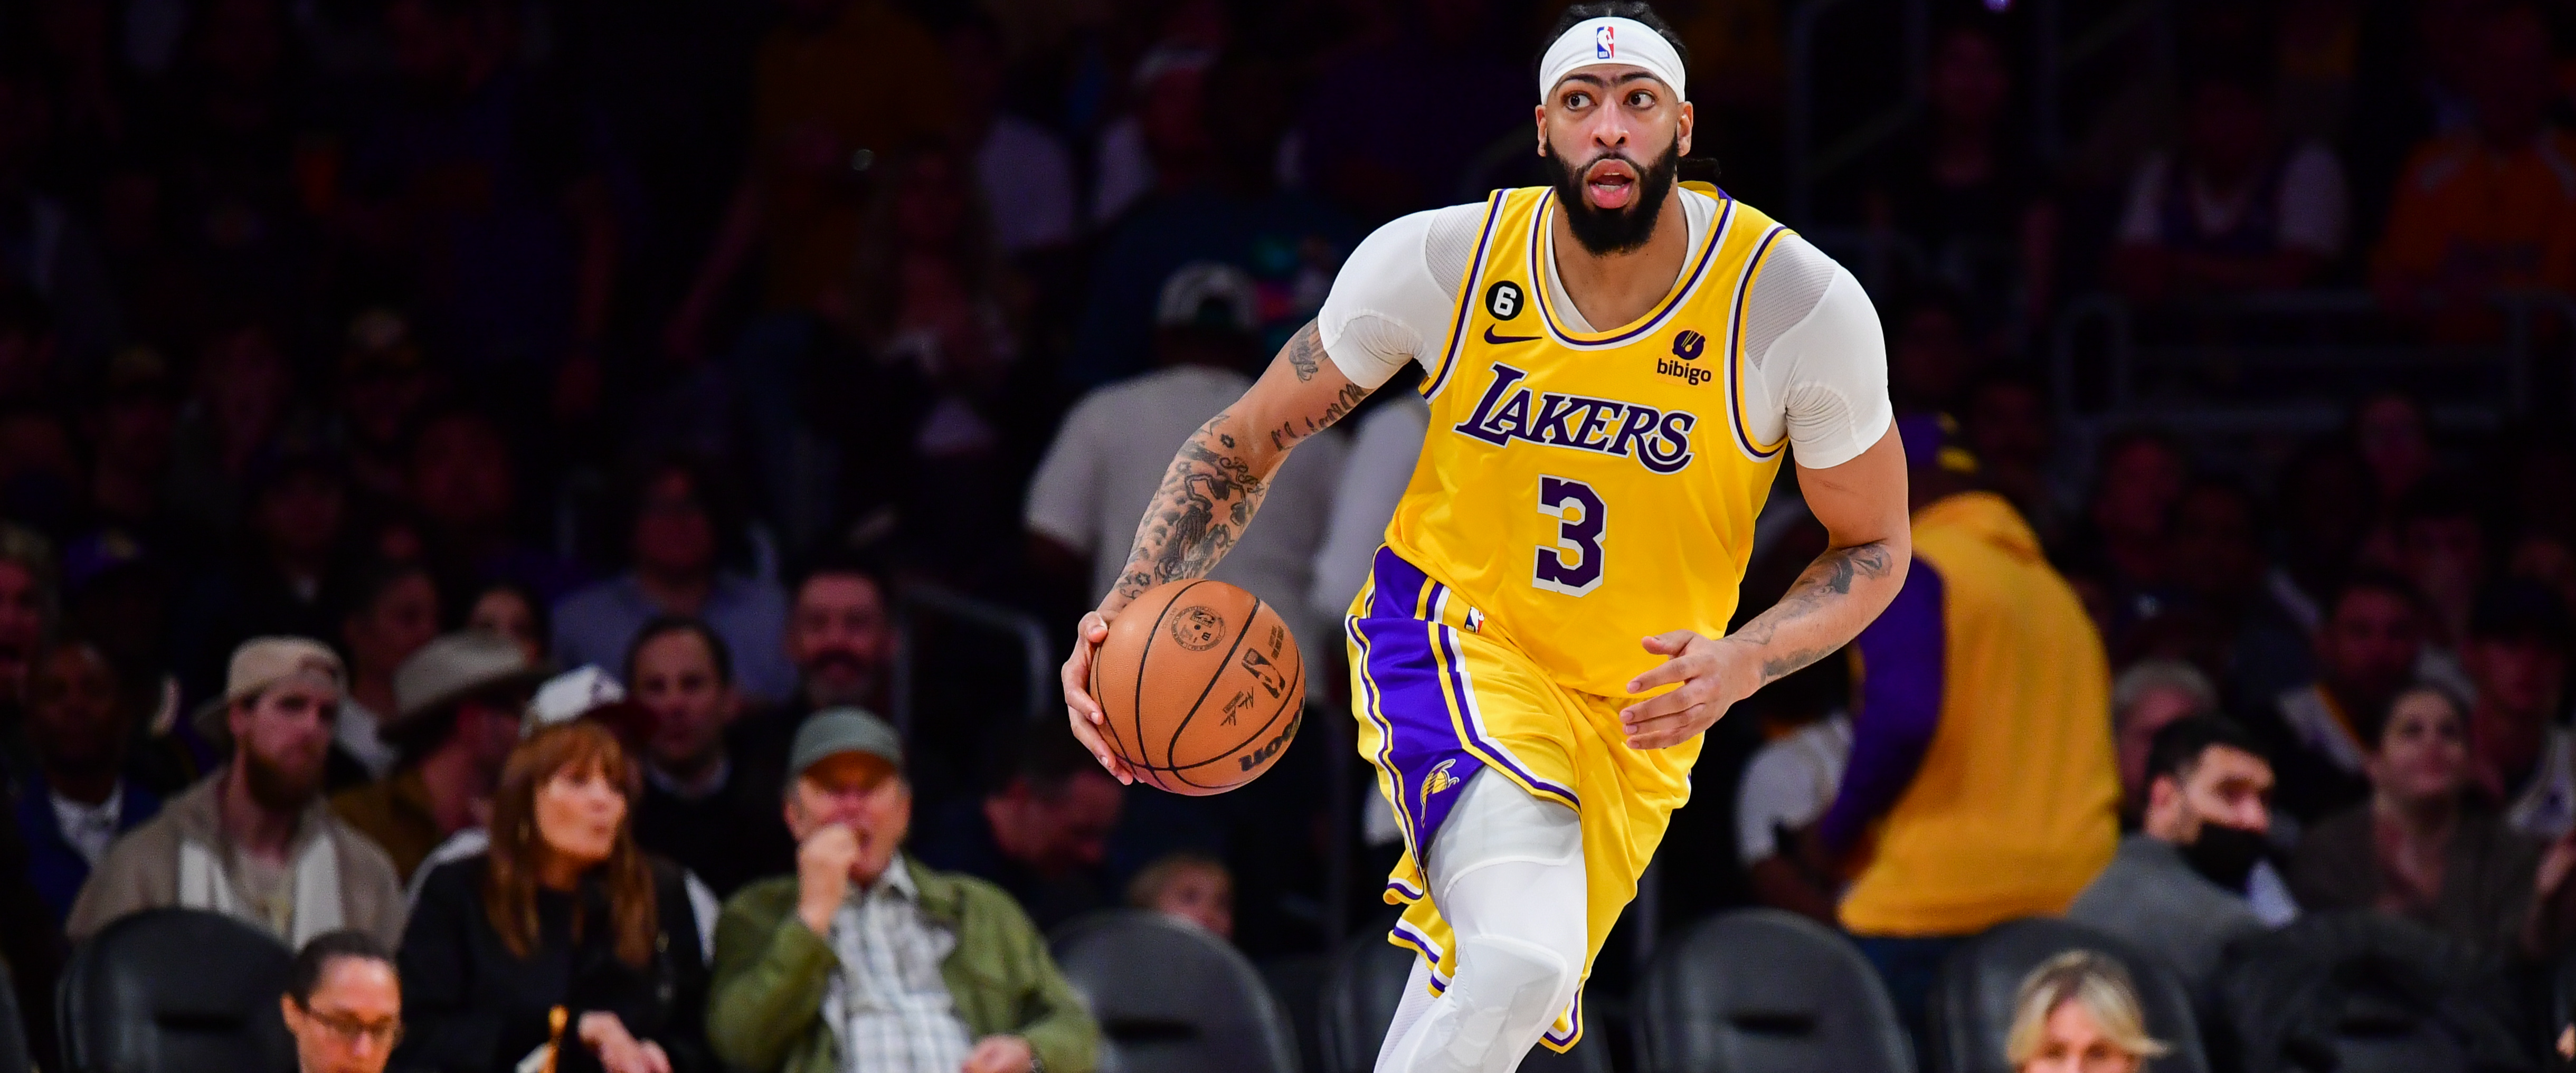 NBA News: Anthony Davis is Expected to Sign an Extension Before Lakers Training Camp